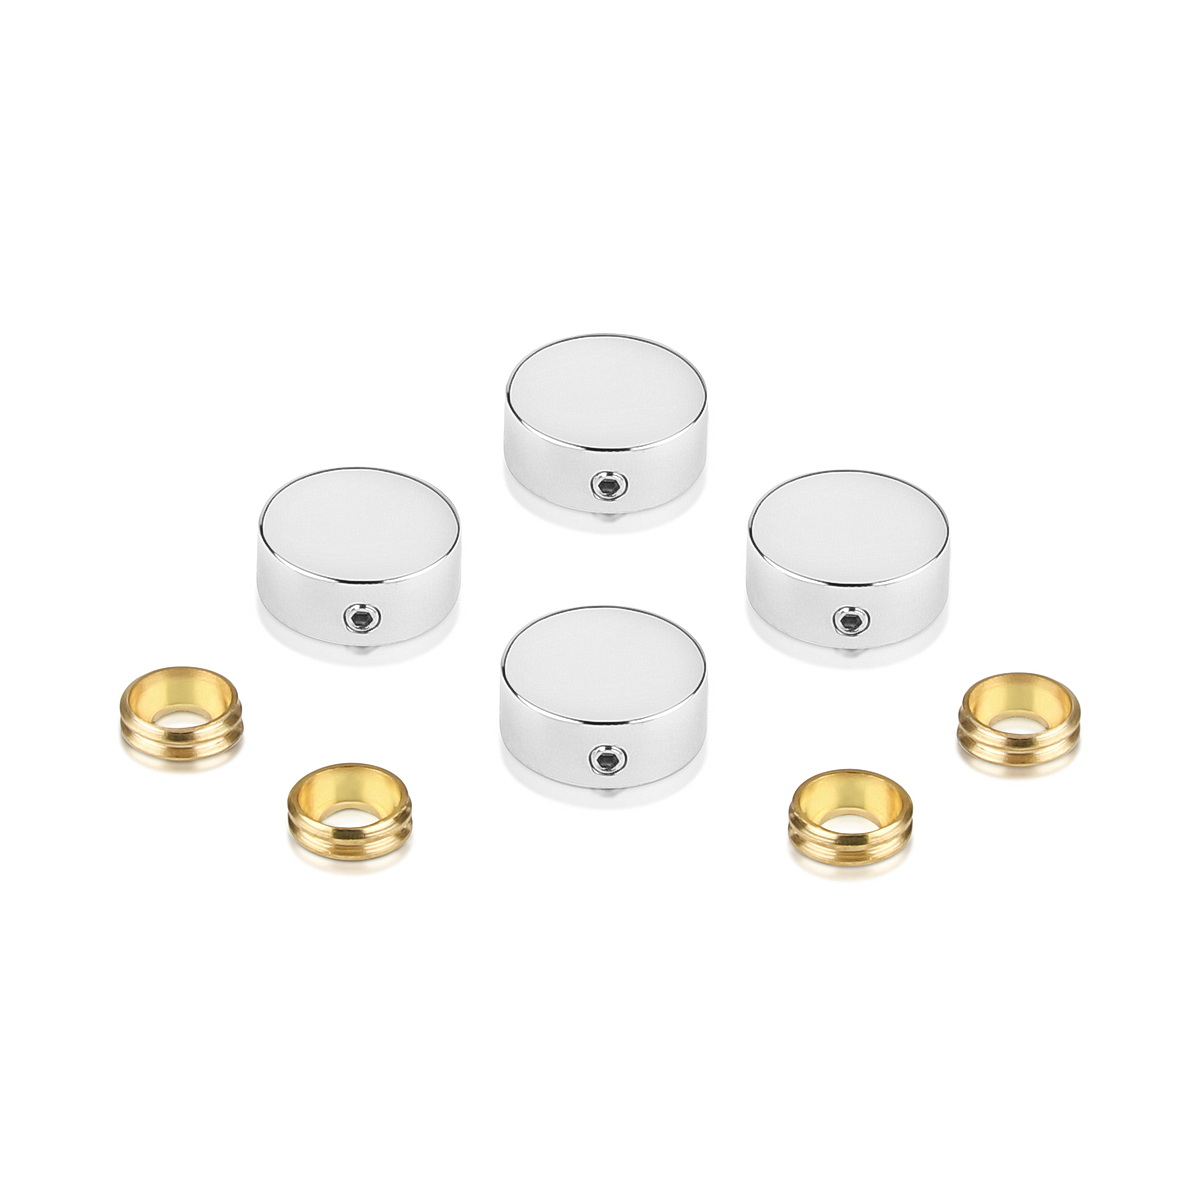 Set of 4 Locking Screw Cover Diameter 5/8'', Polished Stainless Steel Finish (Indoor or Outdoor)